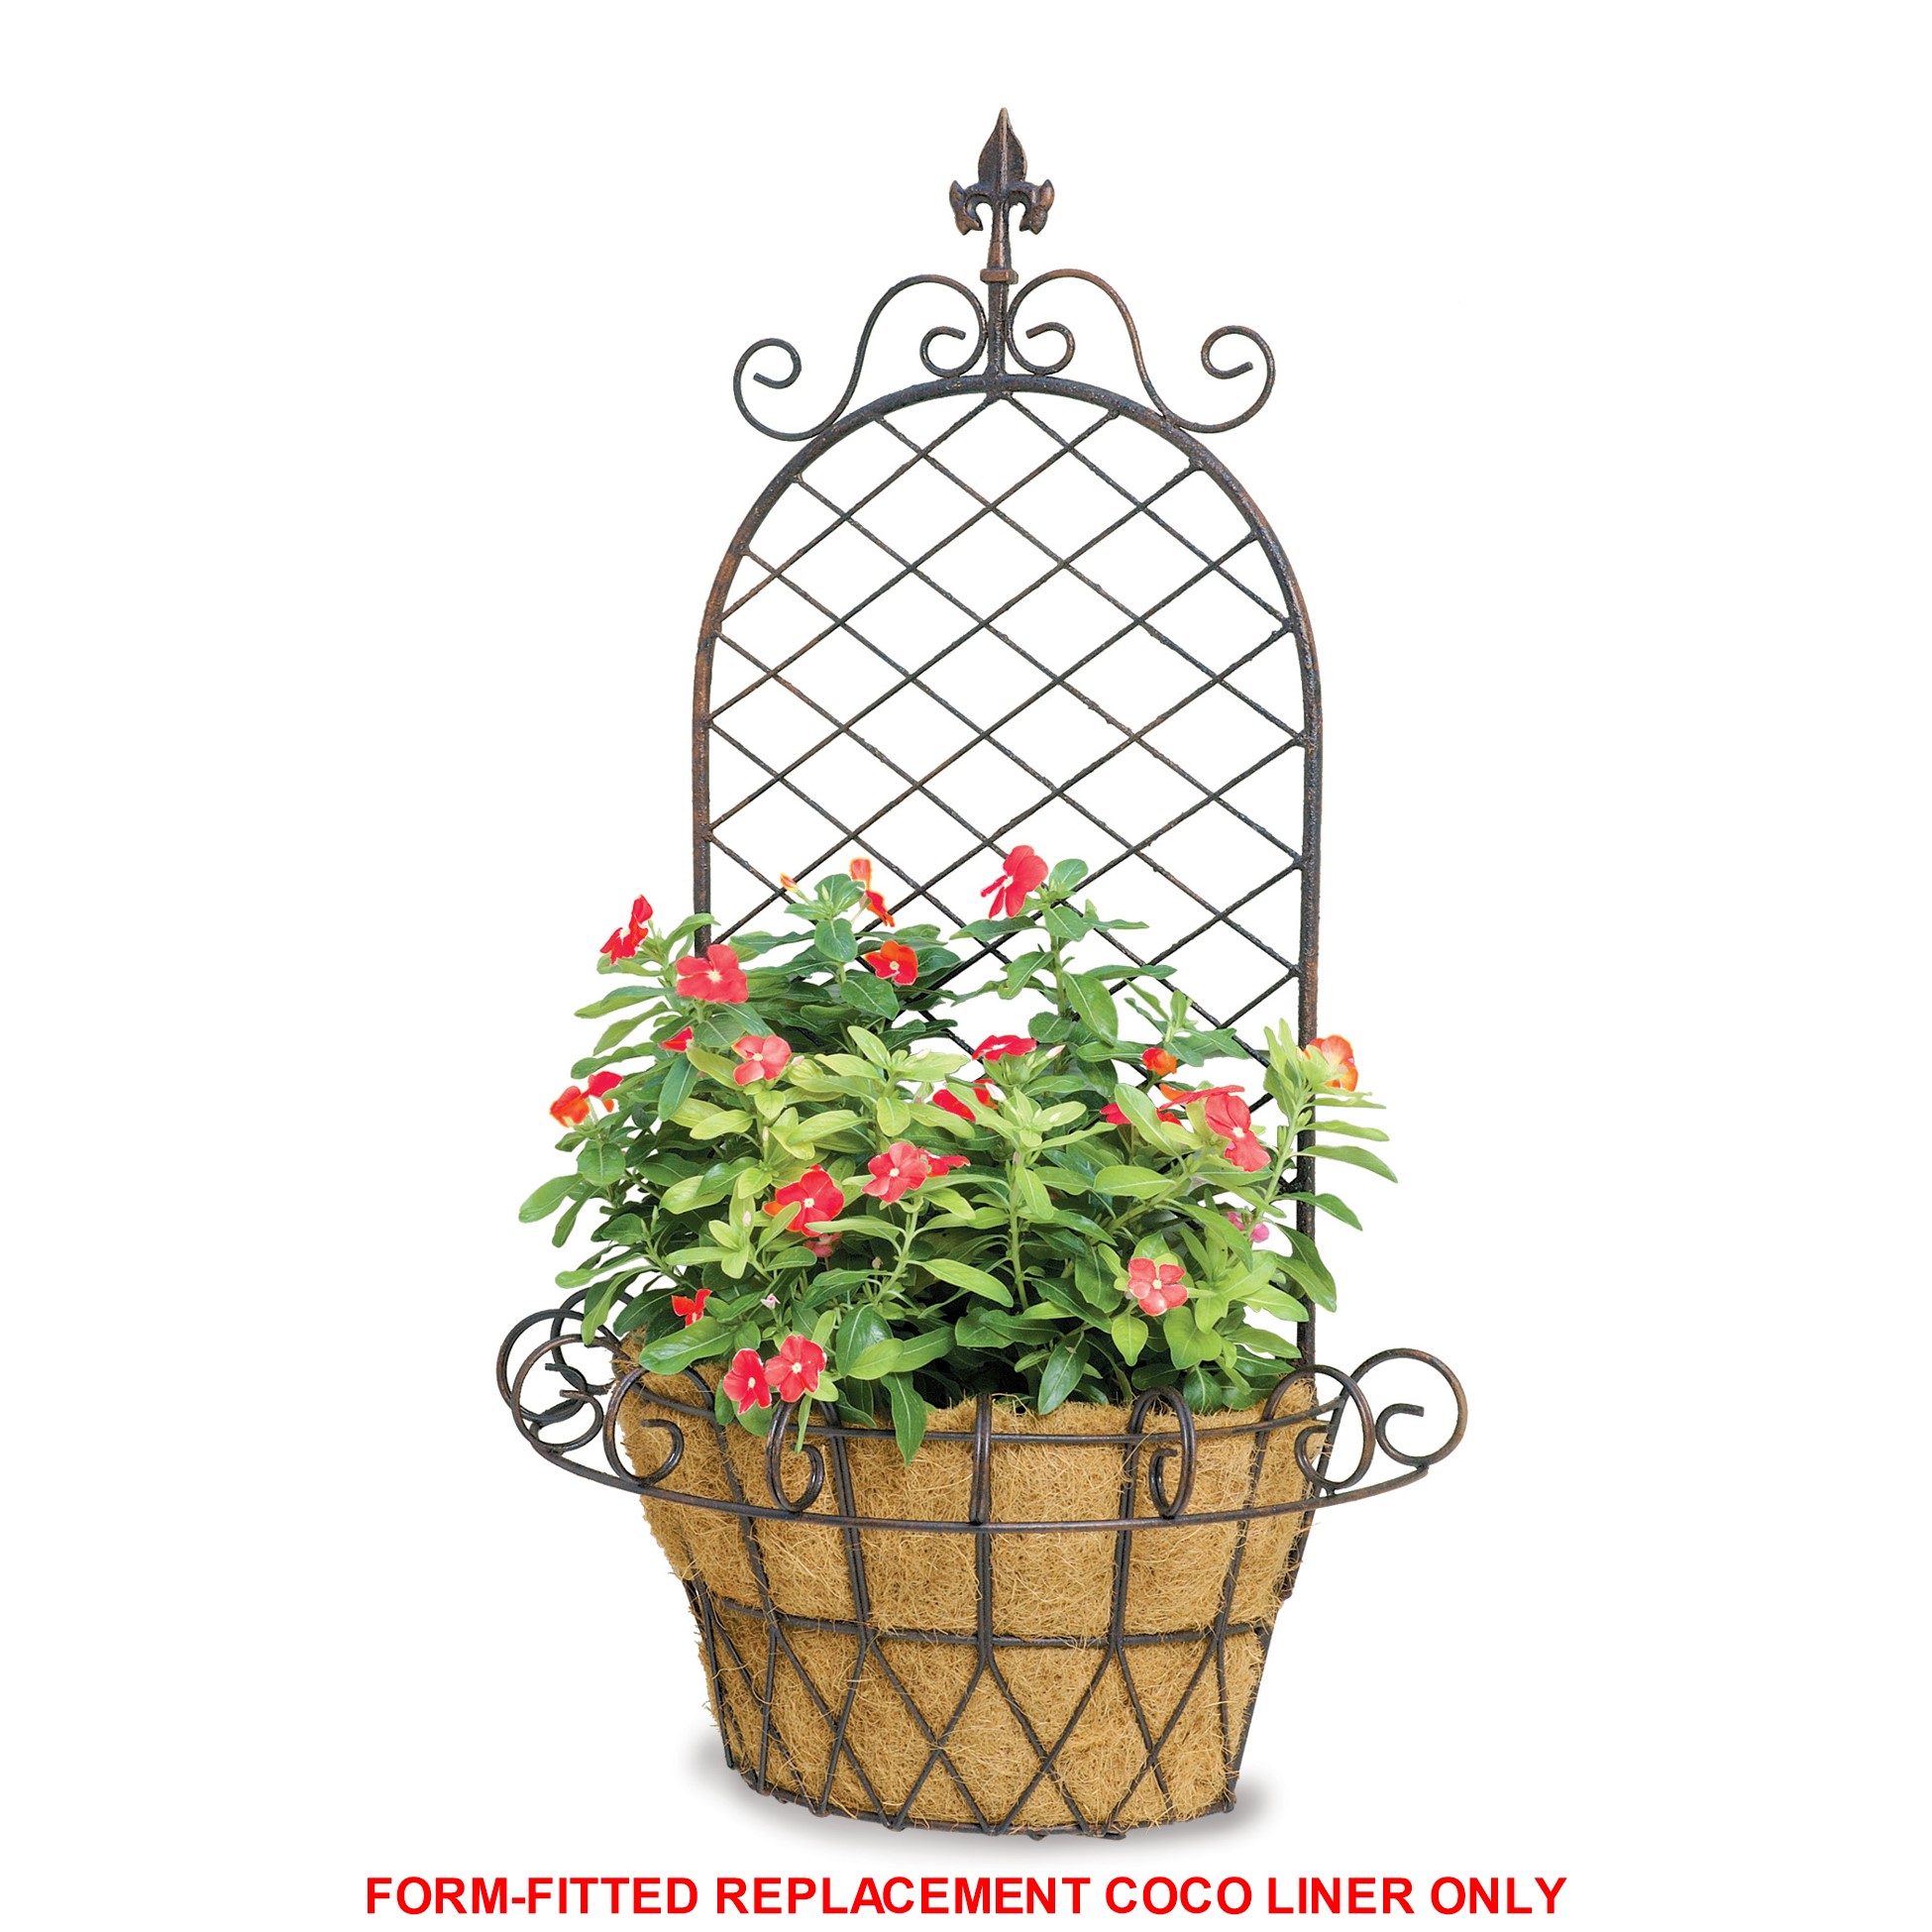 Deer Park Ironworks Replacement Coco Liner for Finial "X" Wall Basket (WB134)